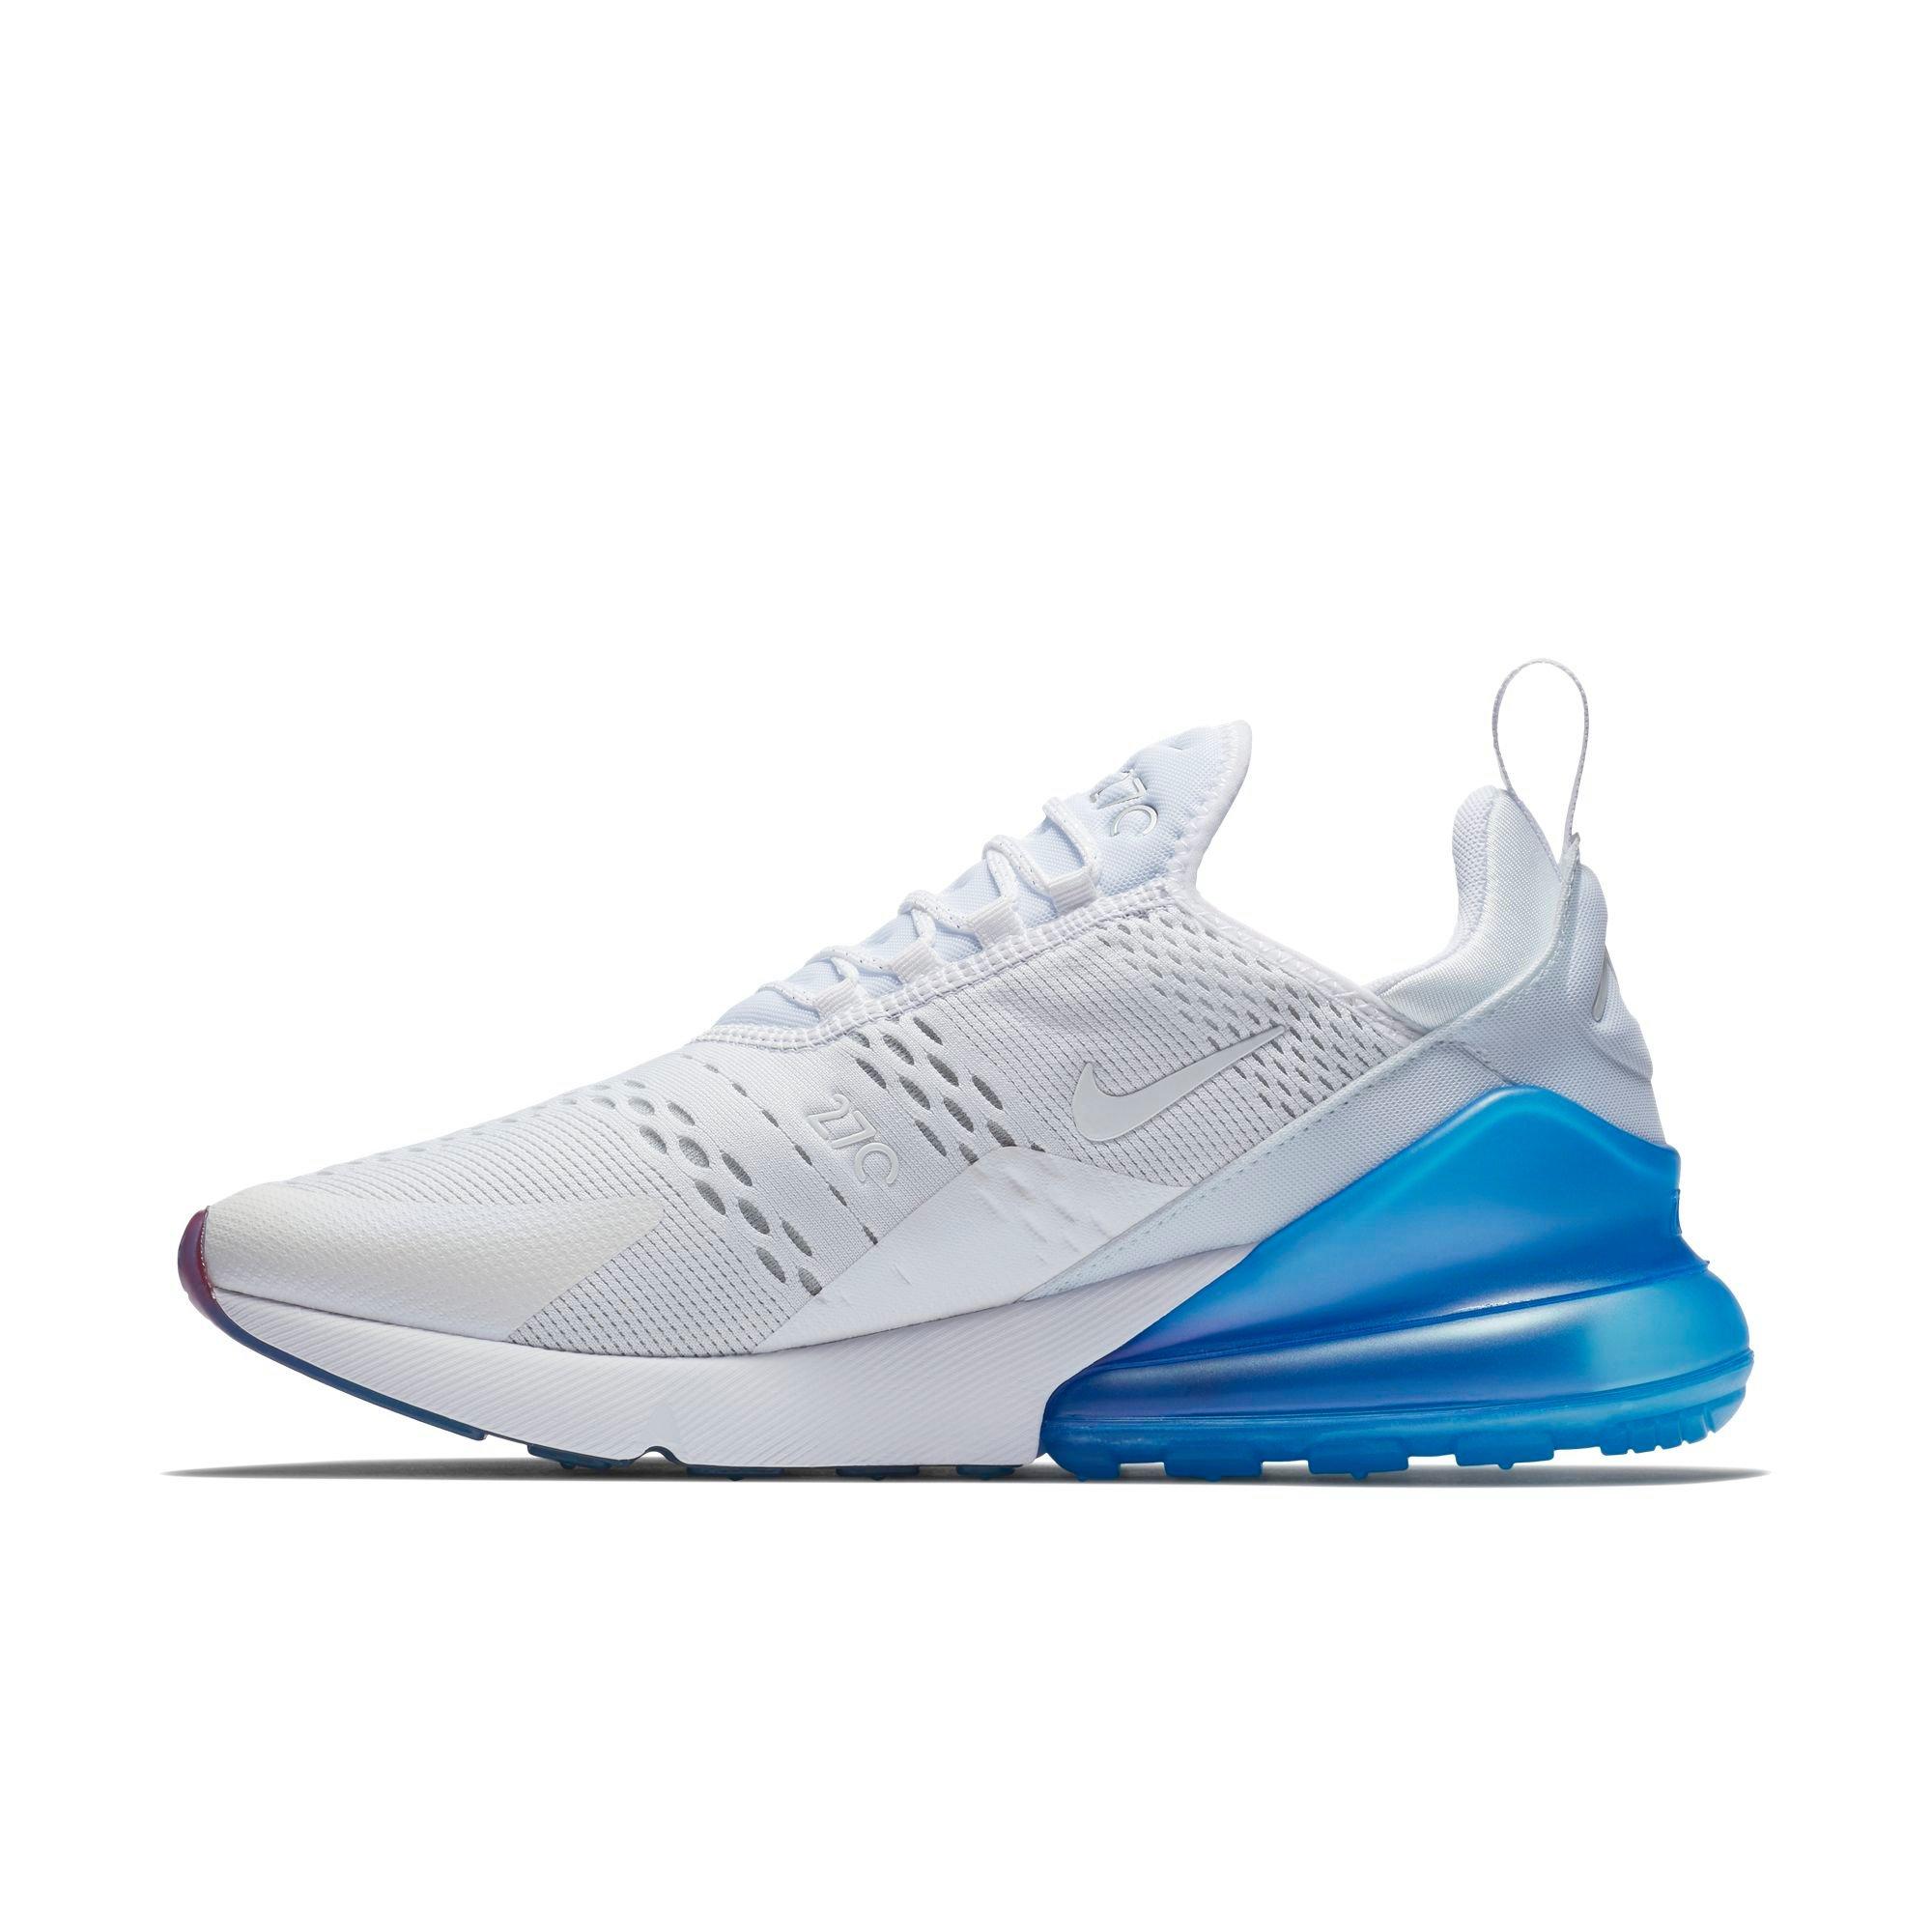 nike air max 270 men's white and blue